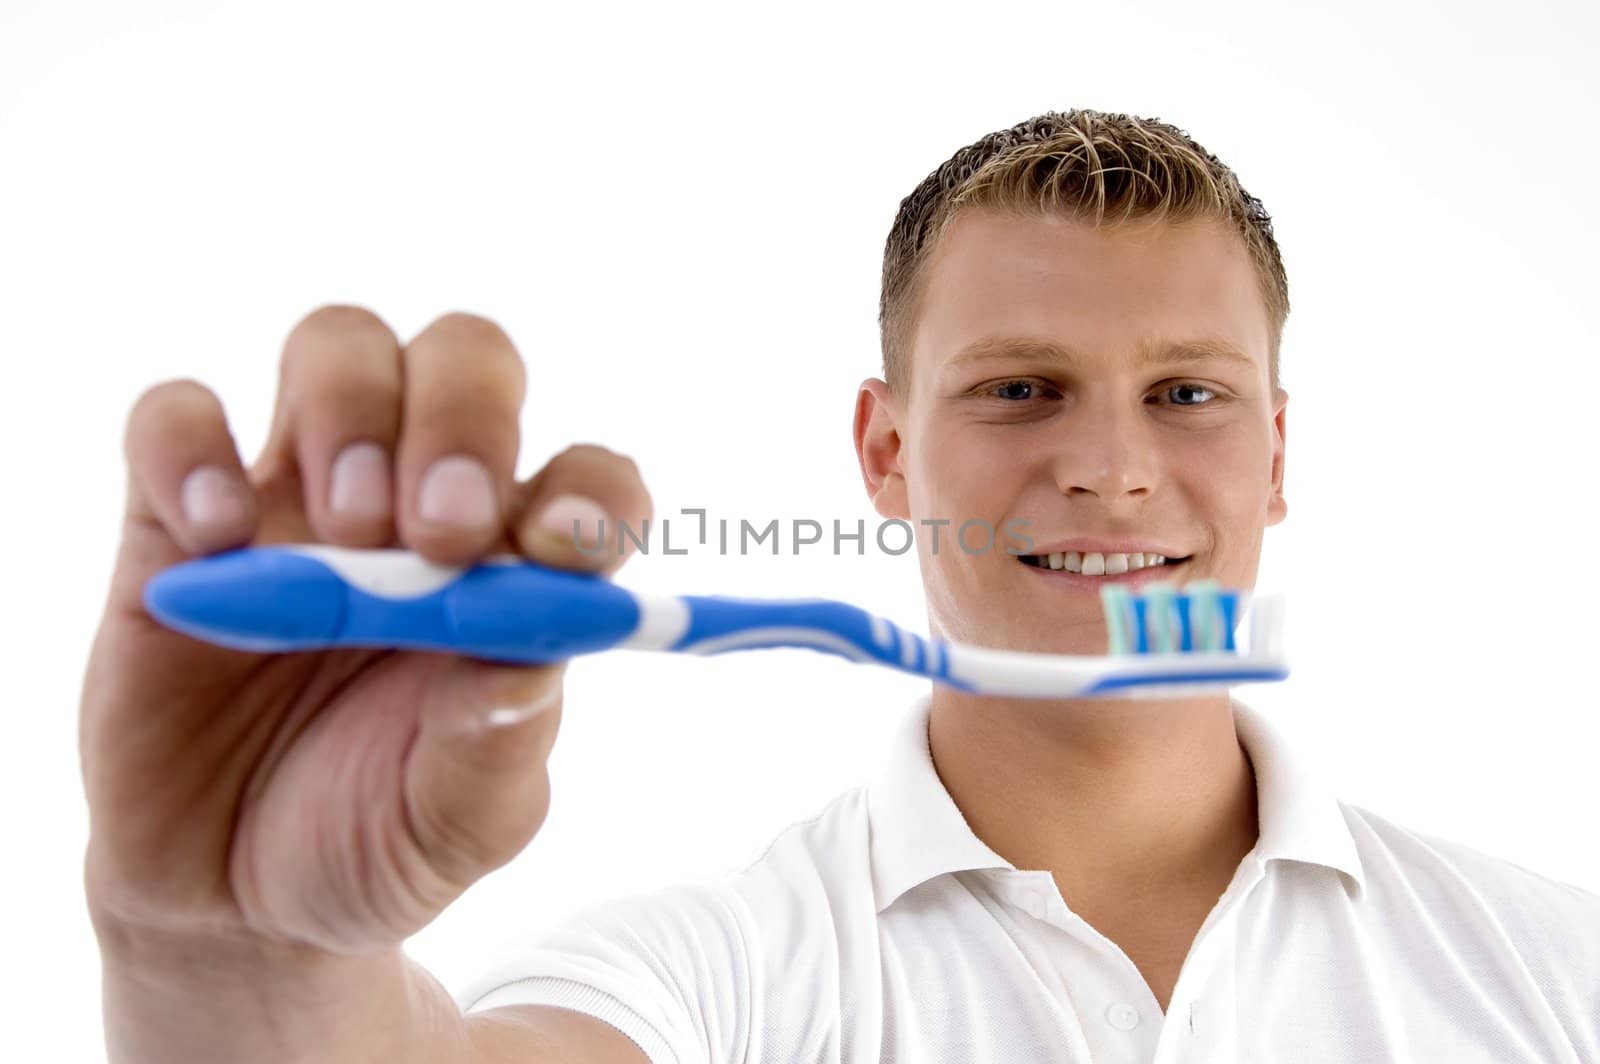 man showing his toothbrush by imagerymajestic